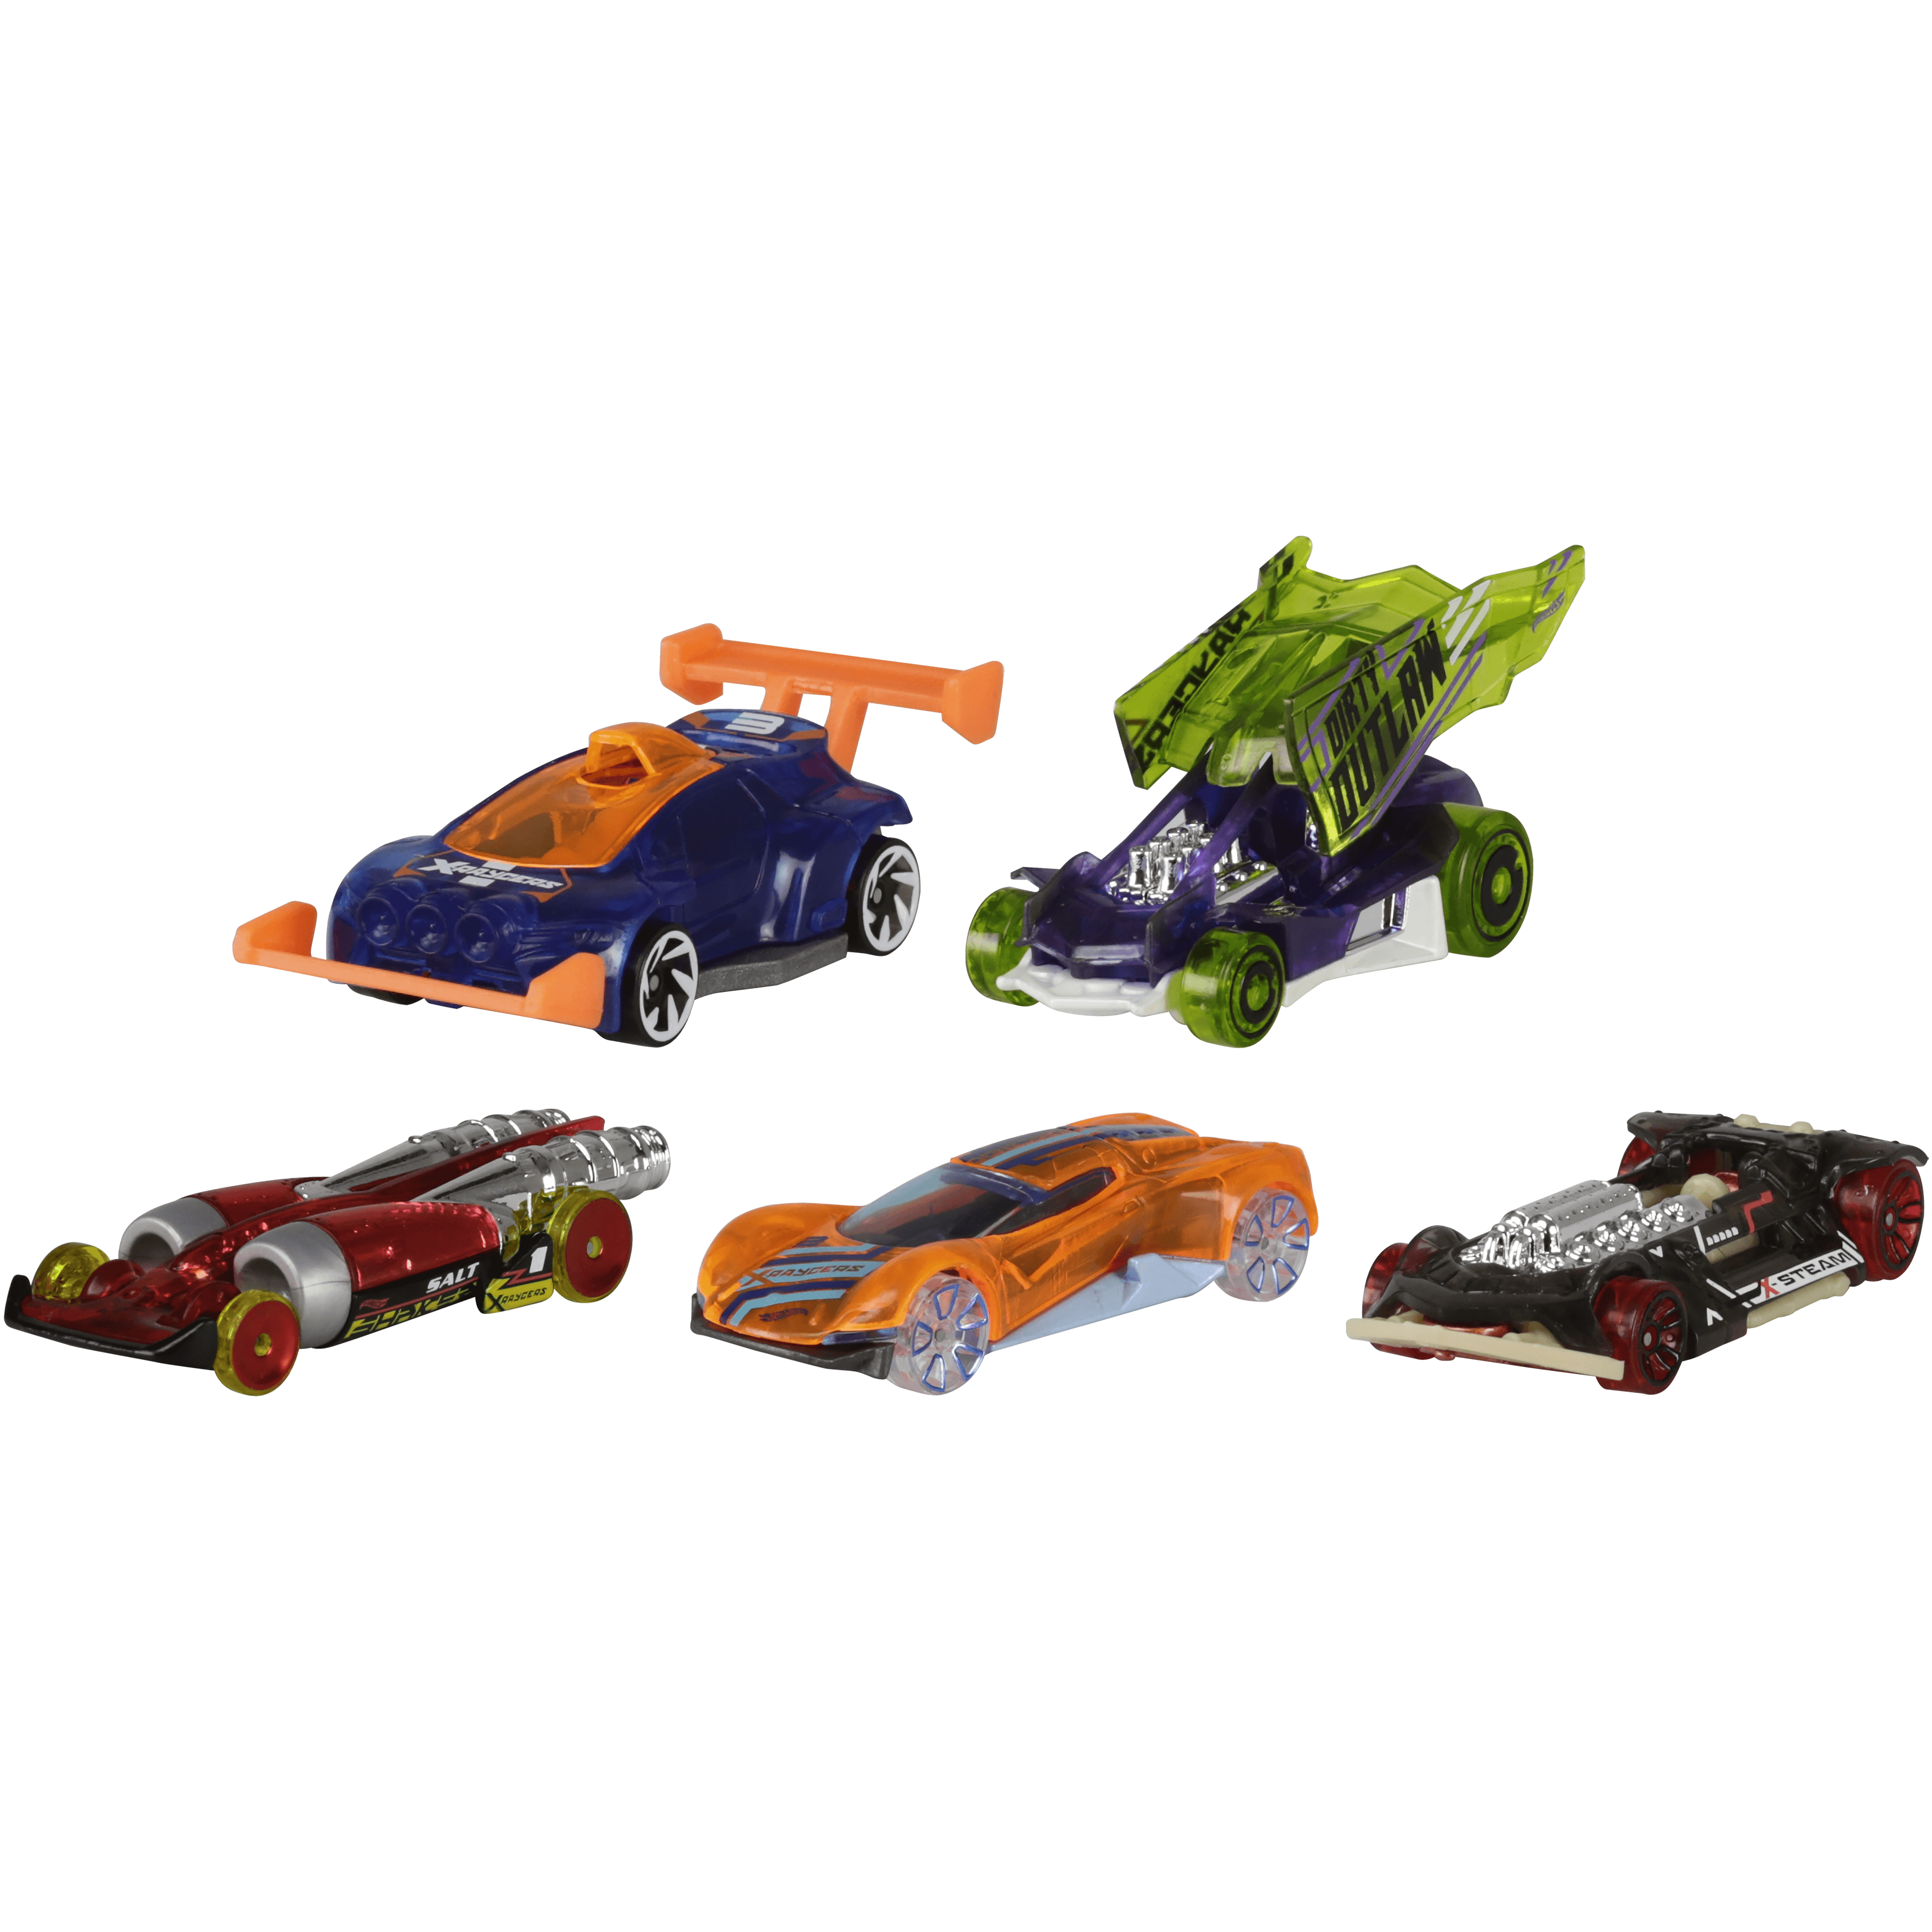 Under $5: Hot Wheels Diecast Cars Five Pack